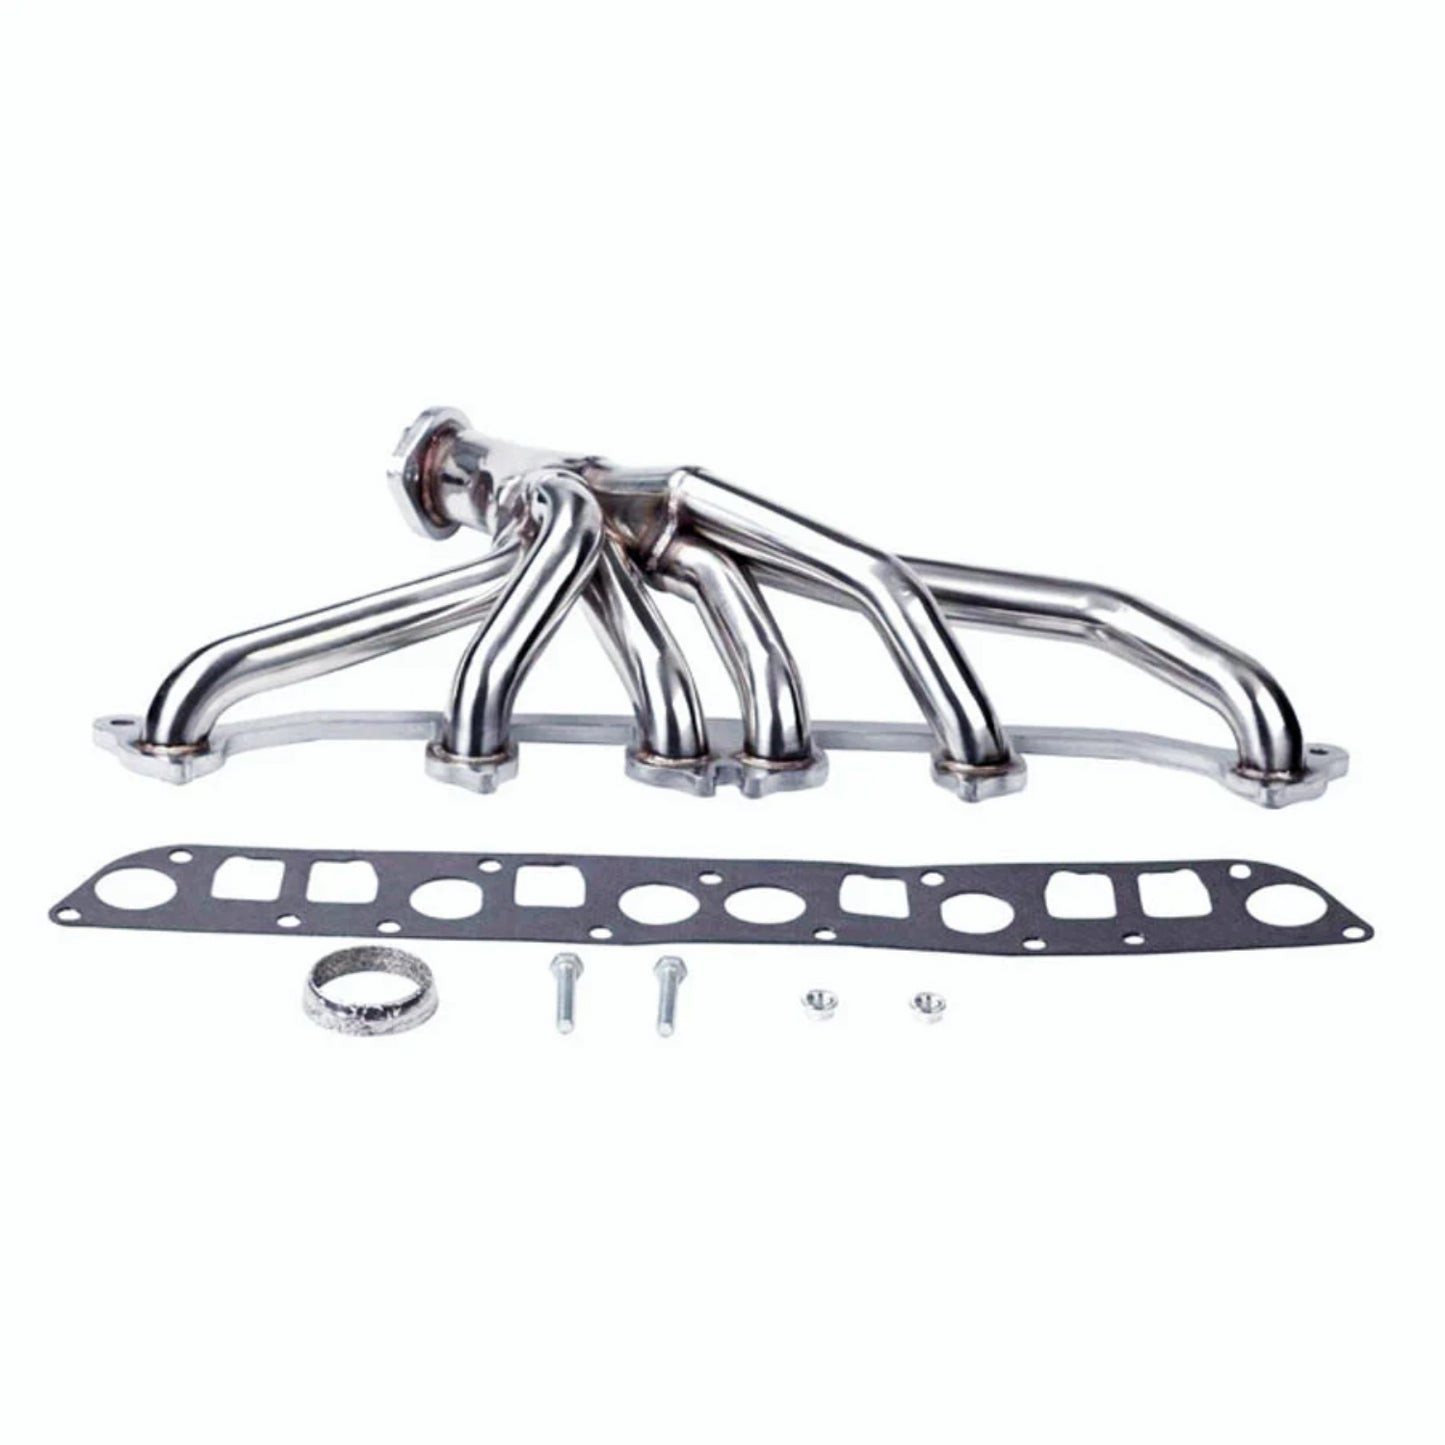 Exhaust Manifold Header for 1991-1999 Jeep Cherokee 1993-1999 Jeep Grand Cherokee 4.0L